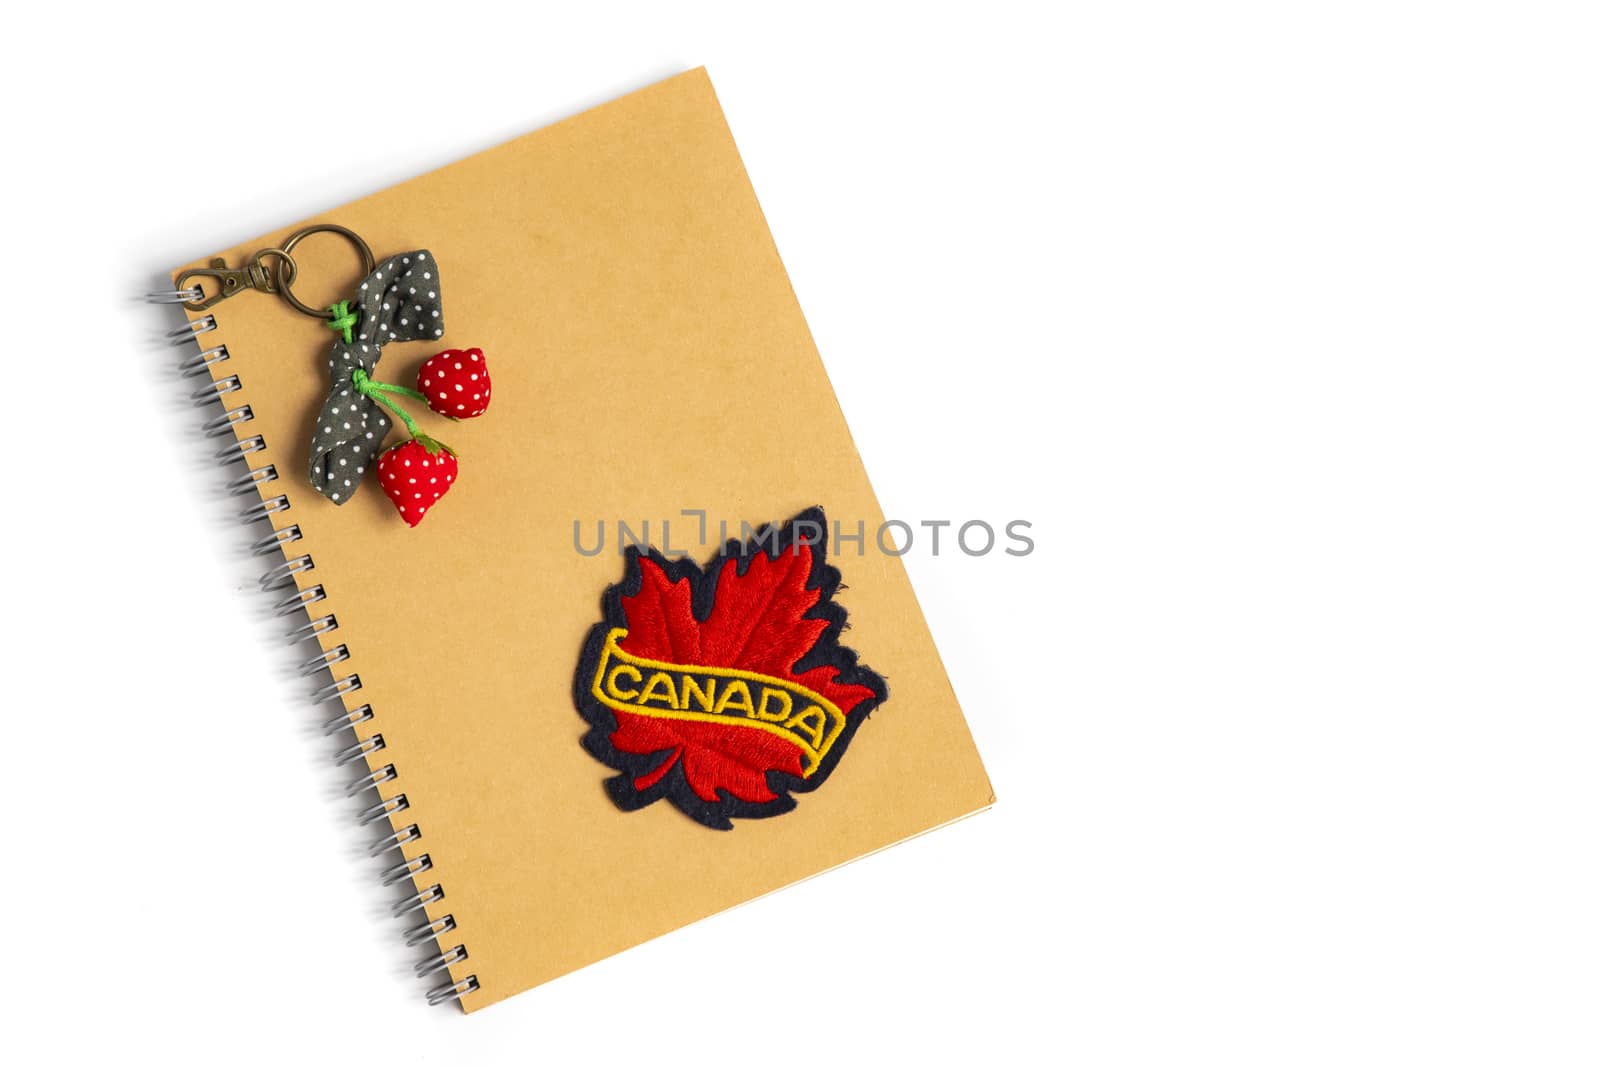 A red maple leaf cloth badge with bright yellow Canada text on a brown notebook. Isolated on white background. July 14th, celebration. Happy Canada Day. July 14th.